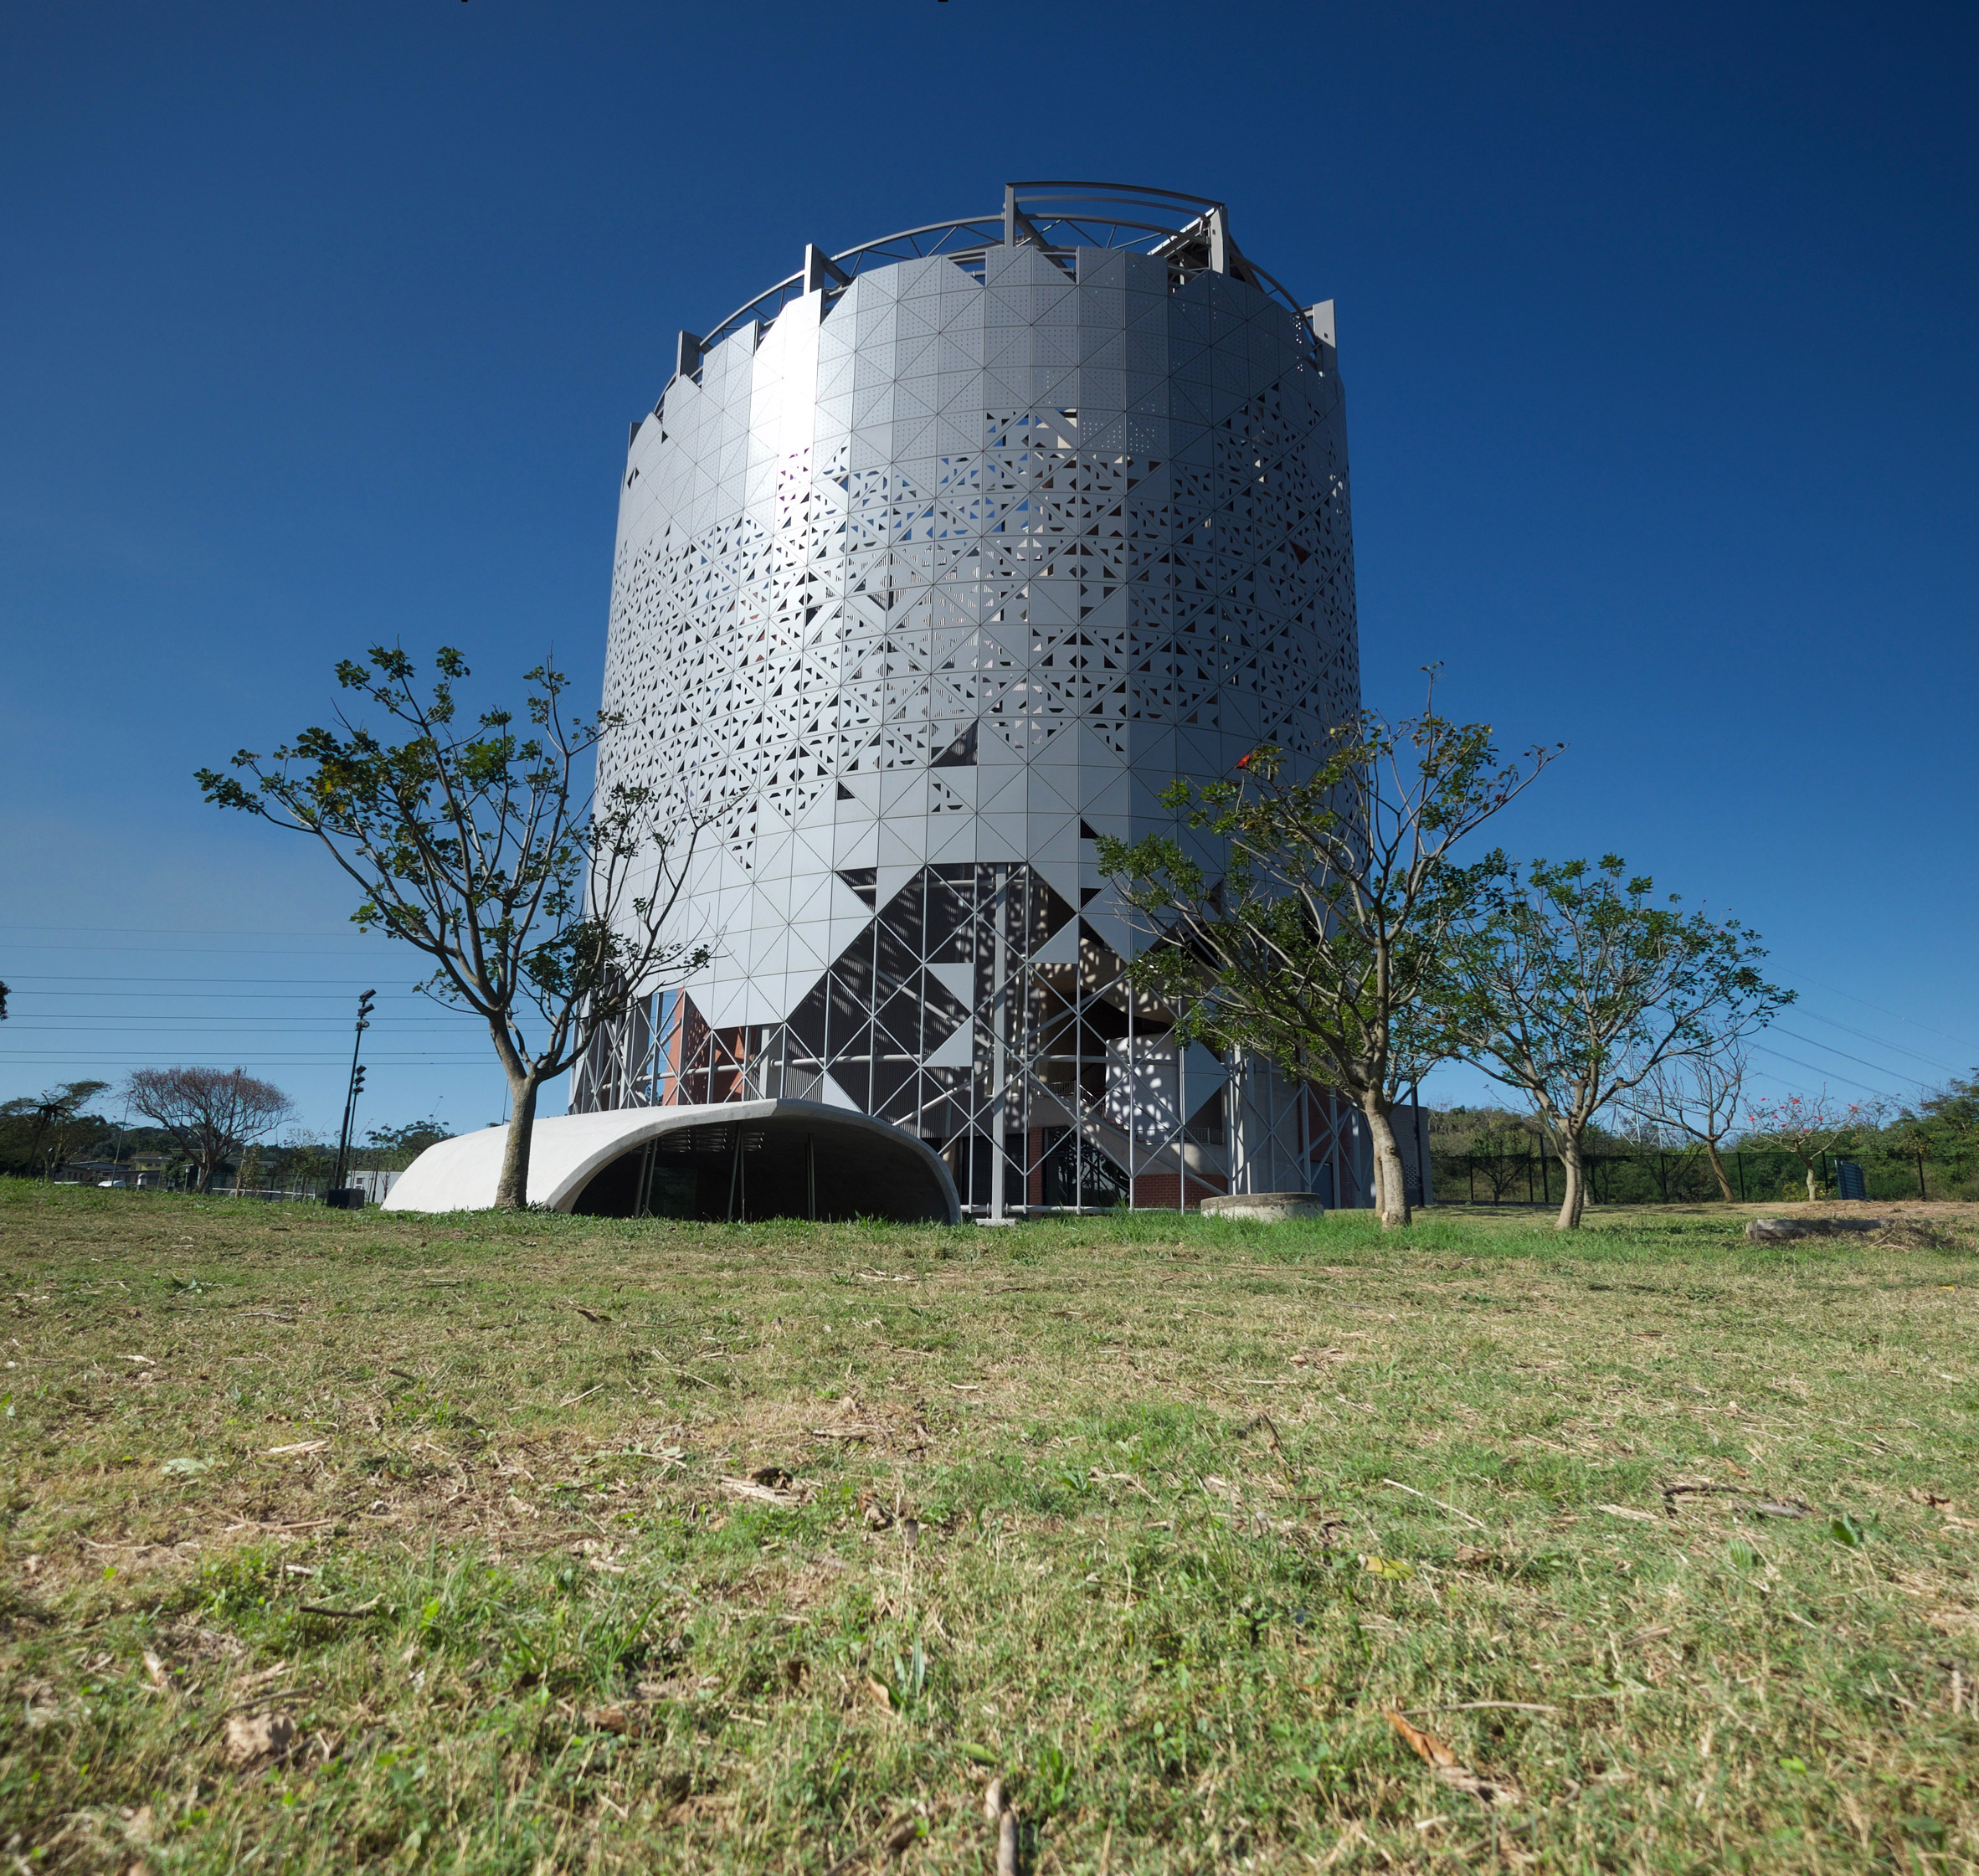 Durban heritage museum scoops top prize in inaugural Africa Architecture Awards